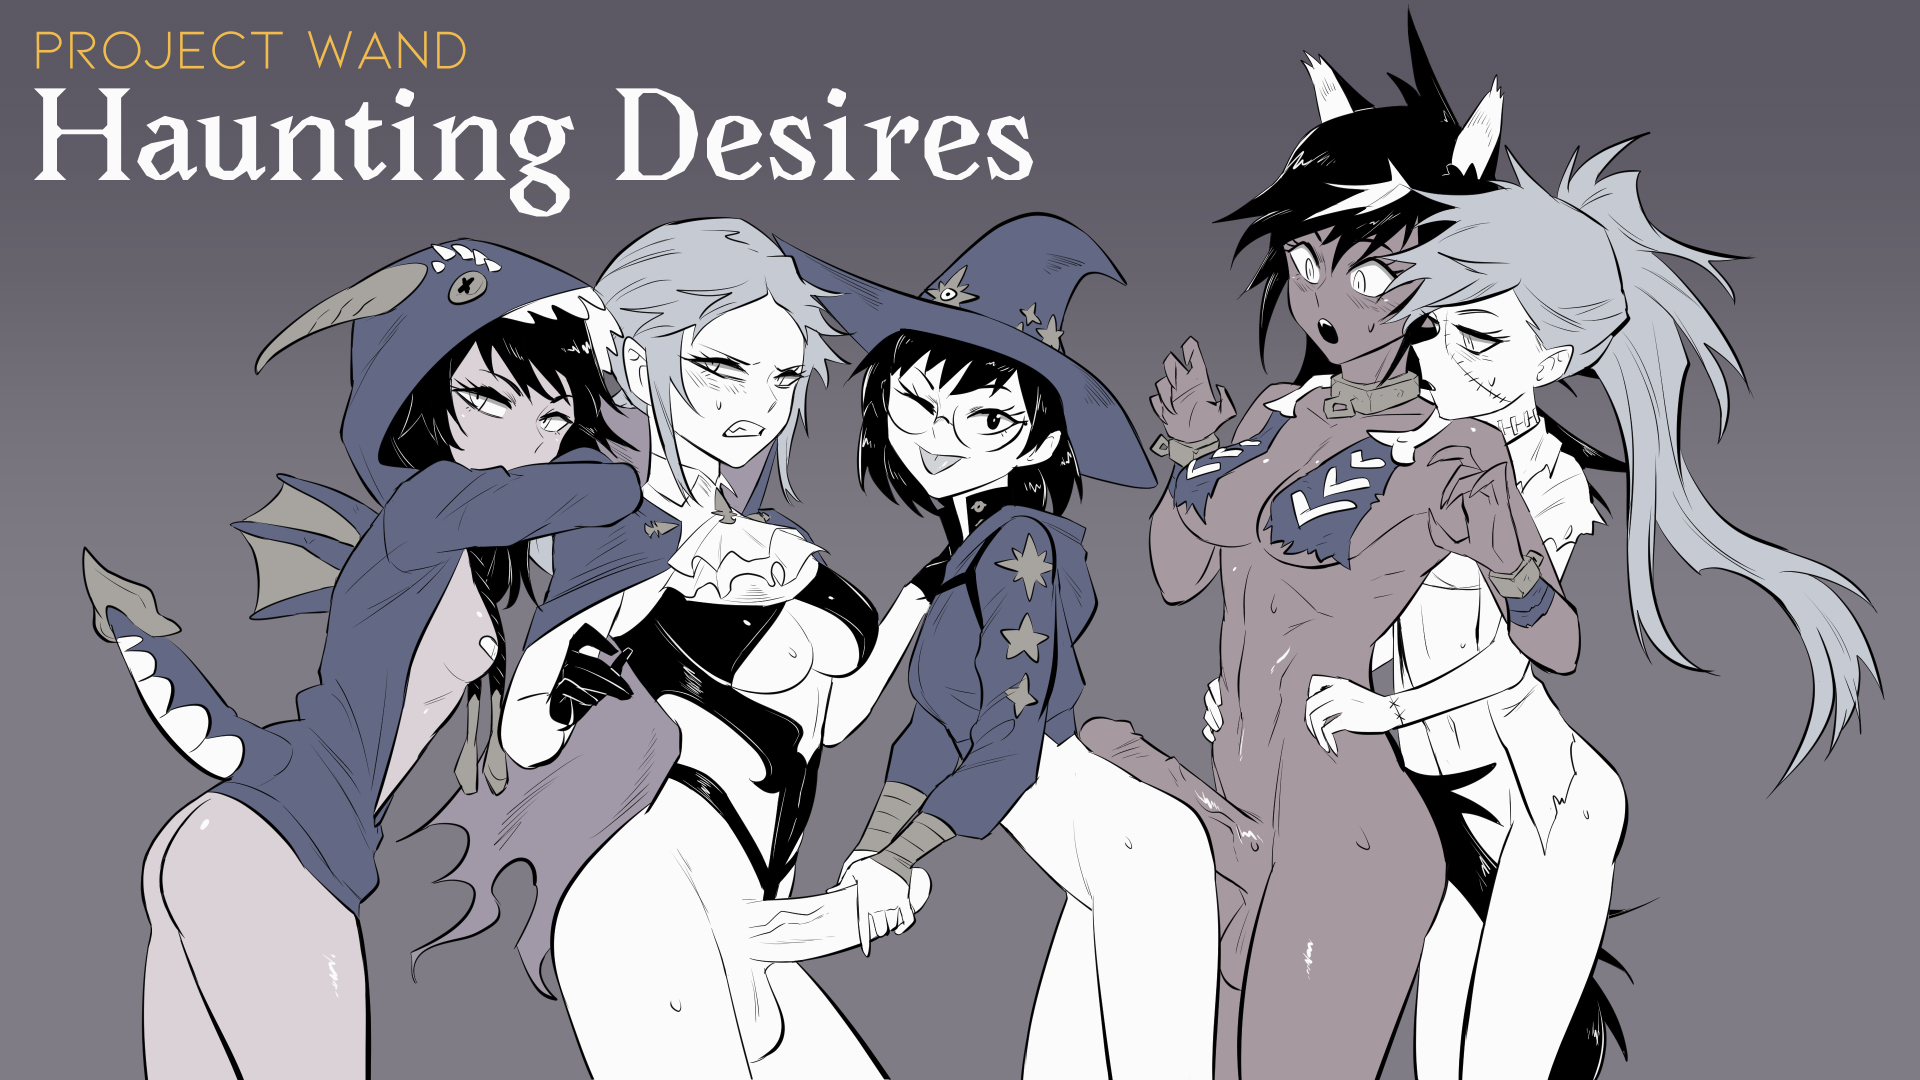 Project WAND Haunting Desires main image